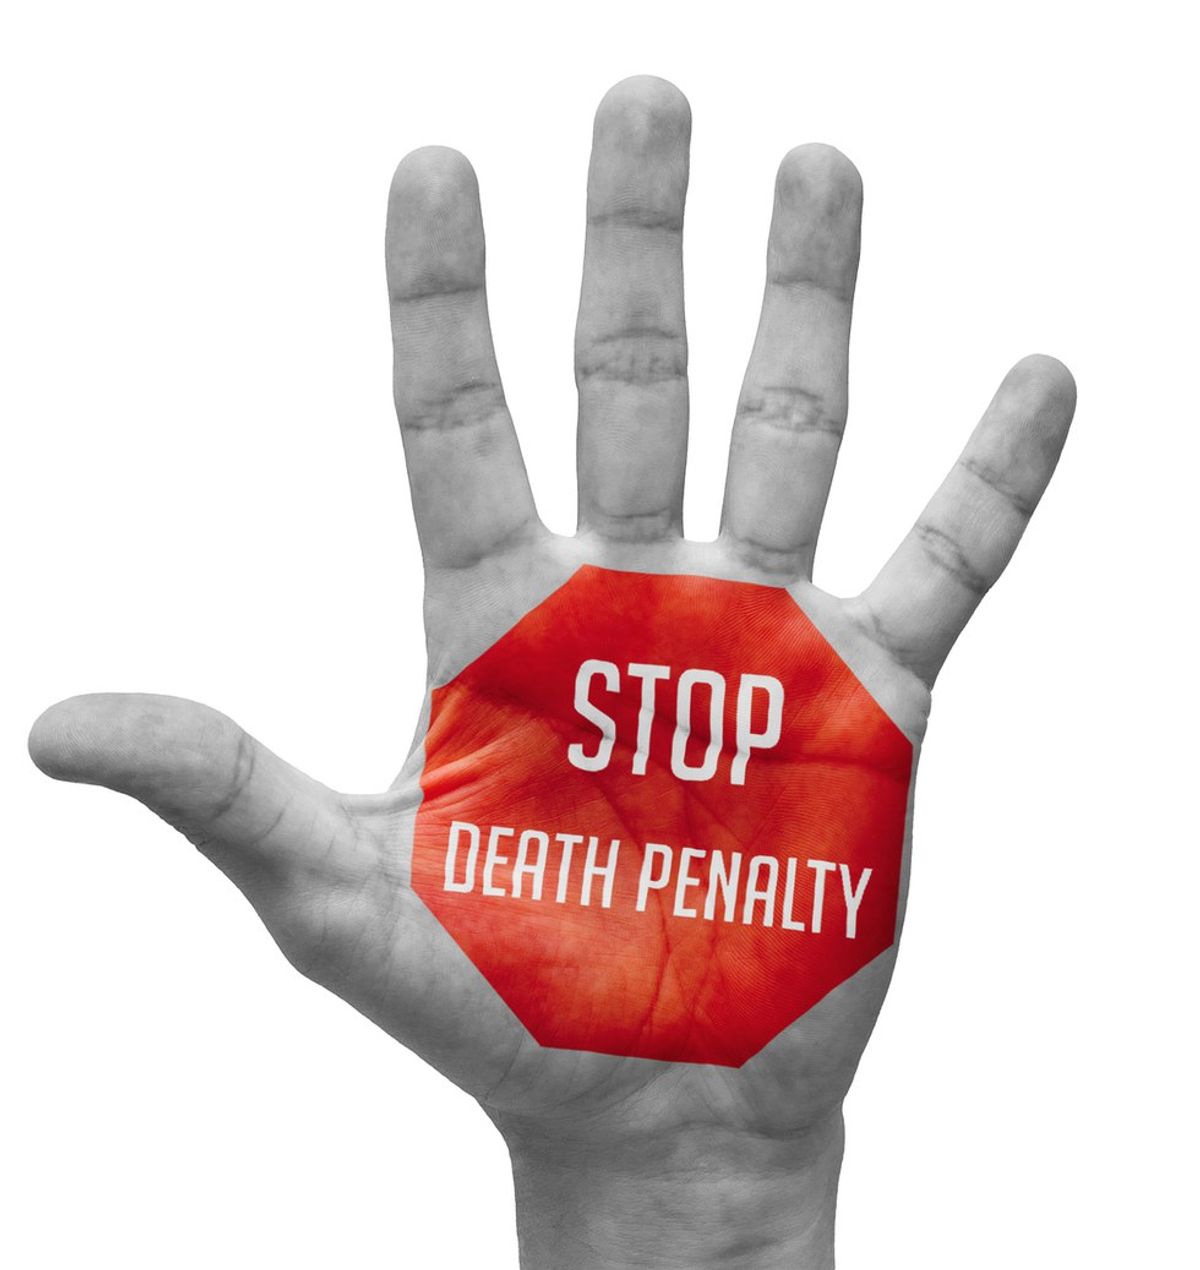 Why The Death Penalty Is A Bad Thing